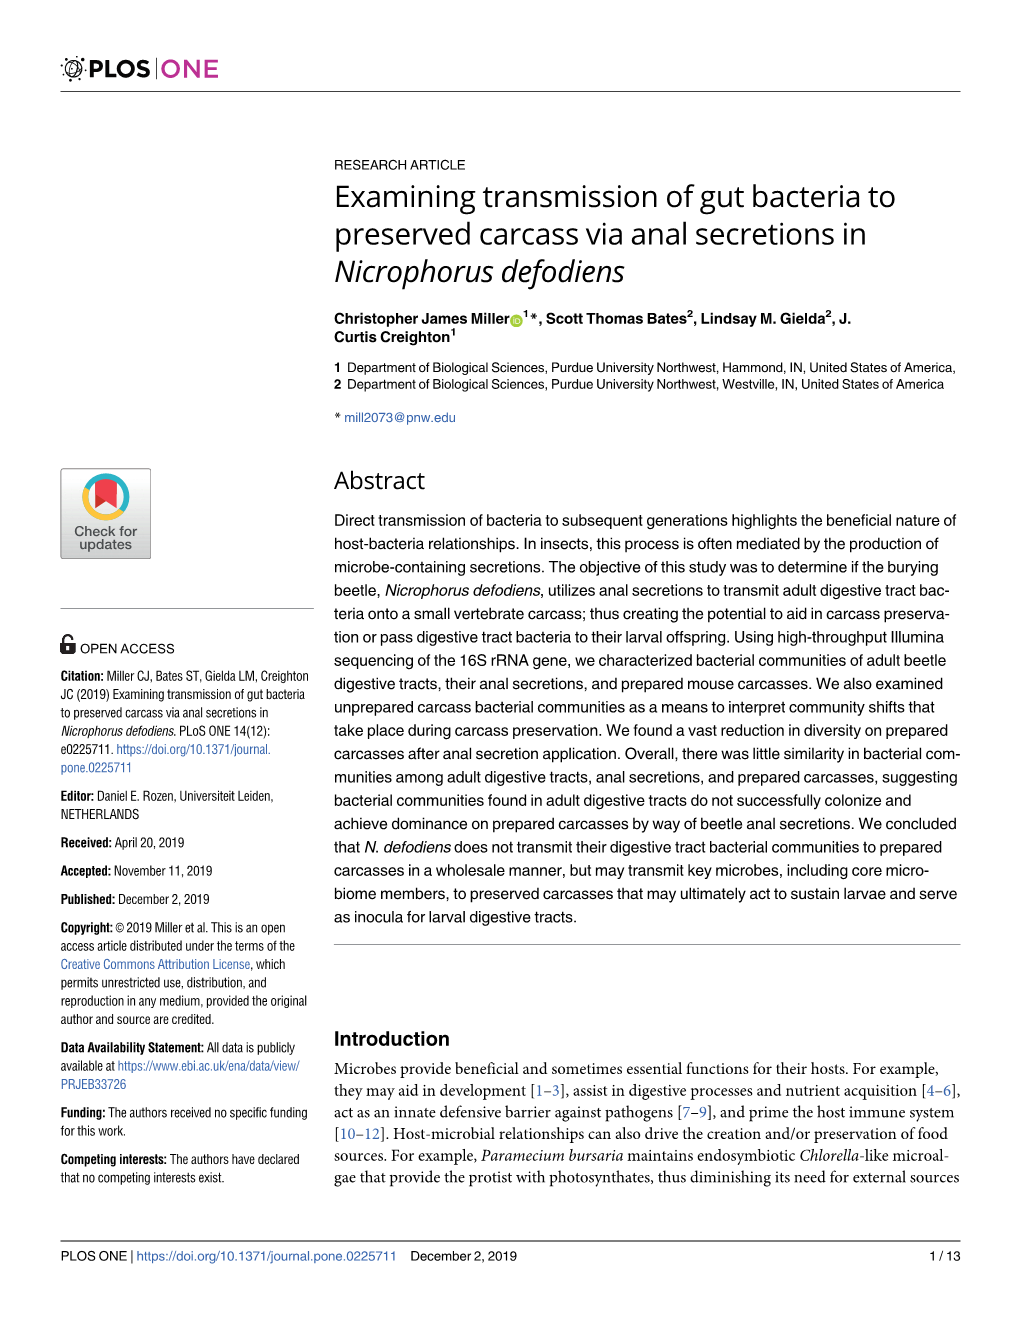 Examining Transmission of Gut Bacteria to Preserved Carcass Via Anal Secretions in Nicrophorus Defodiens